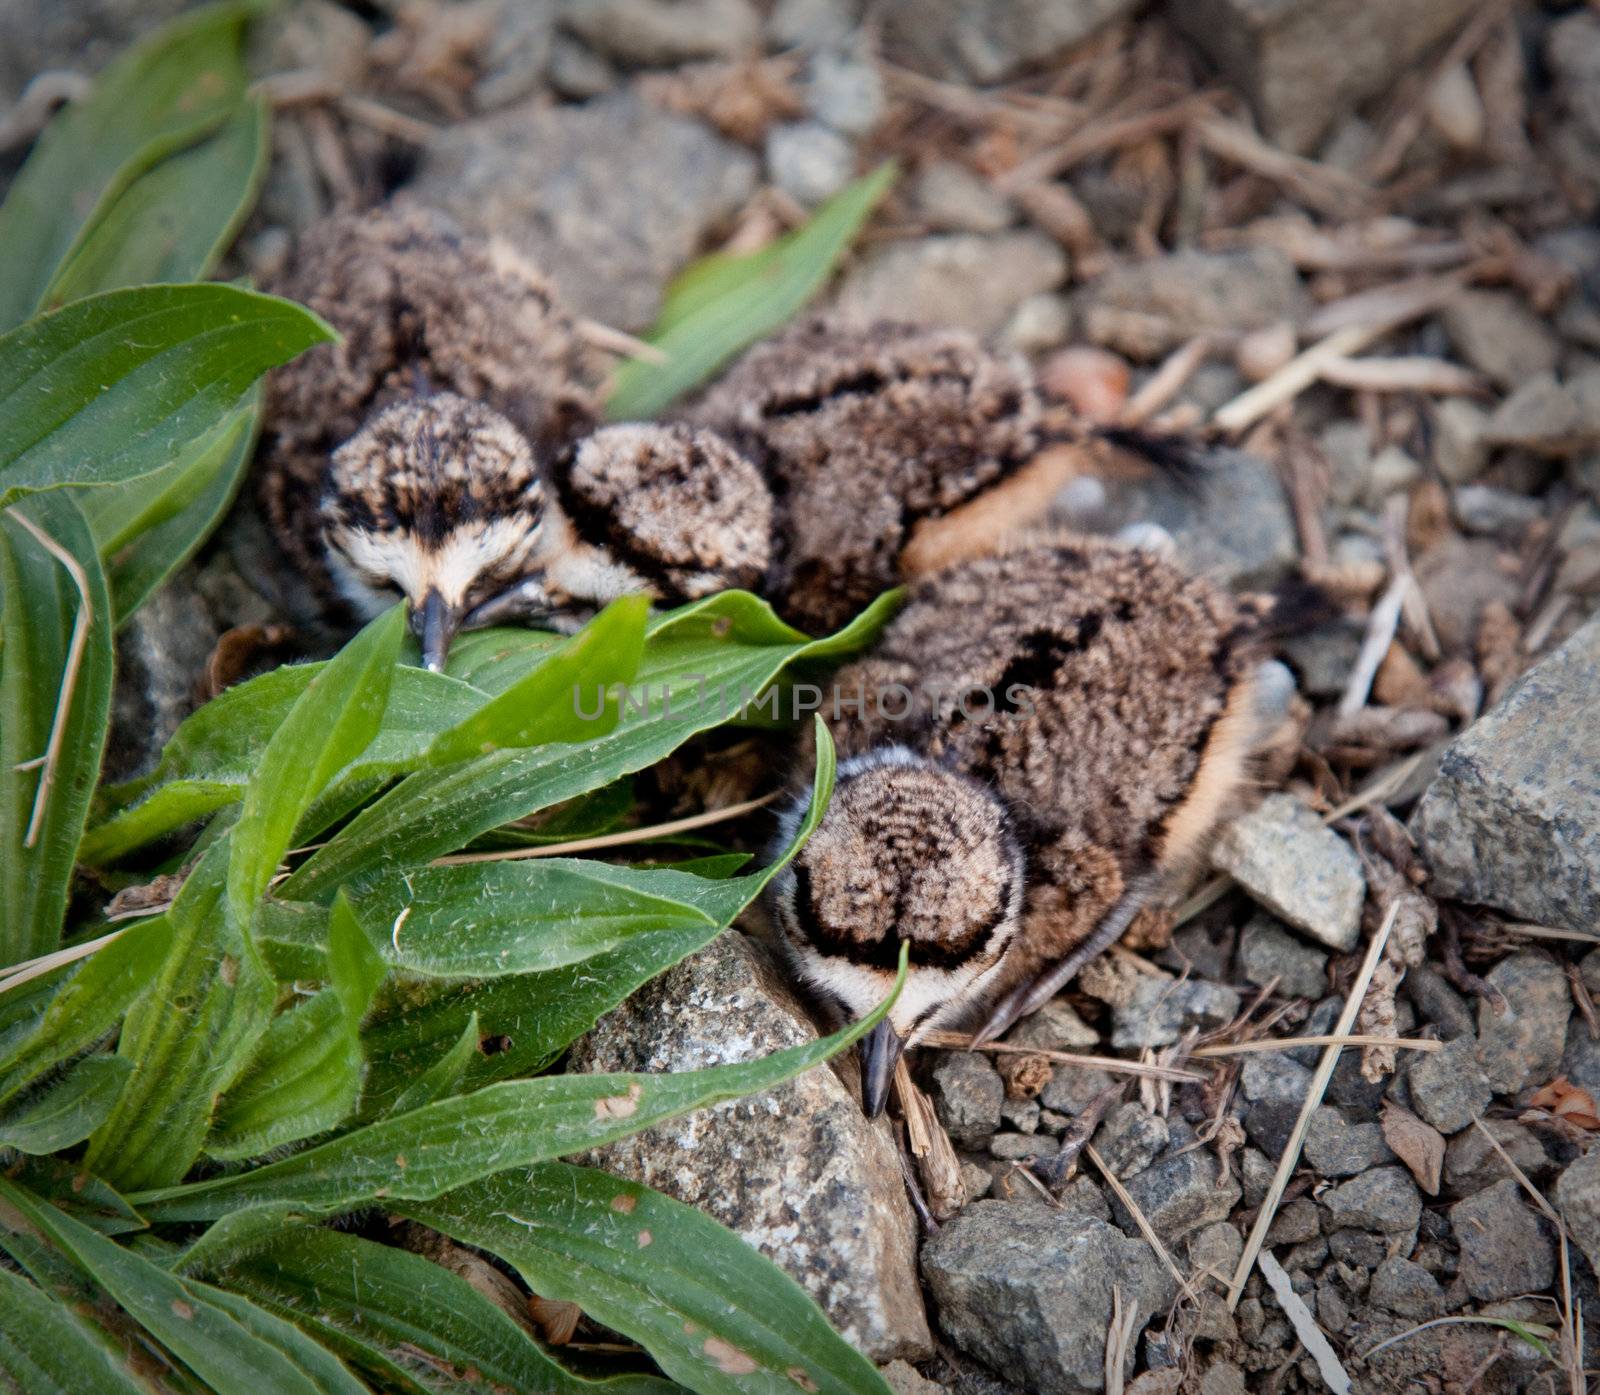 Three small Killdeer chicks just hatched by steheap